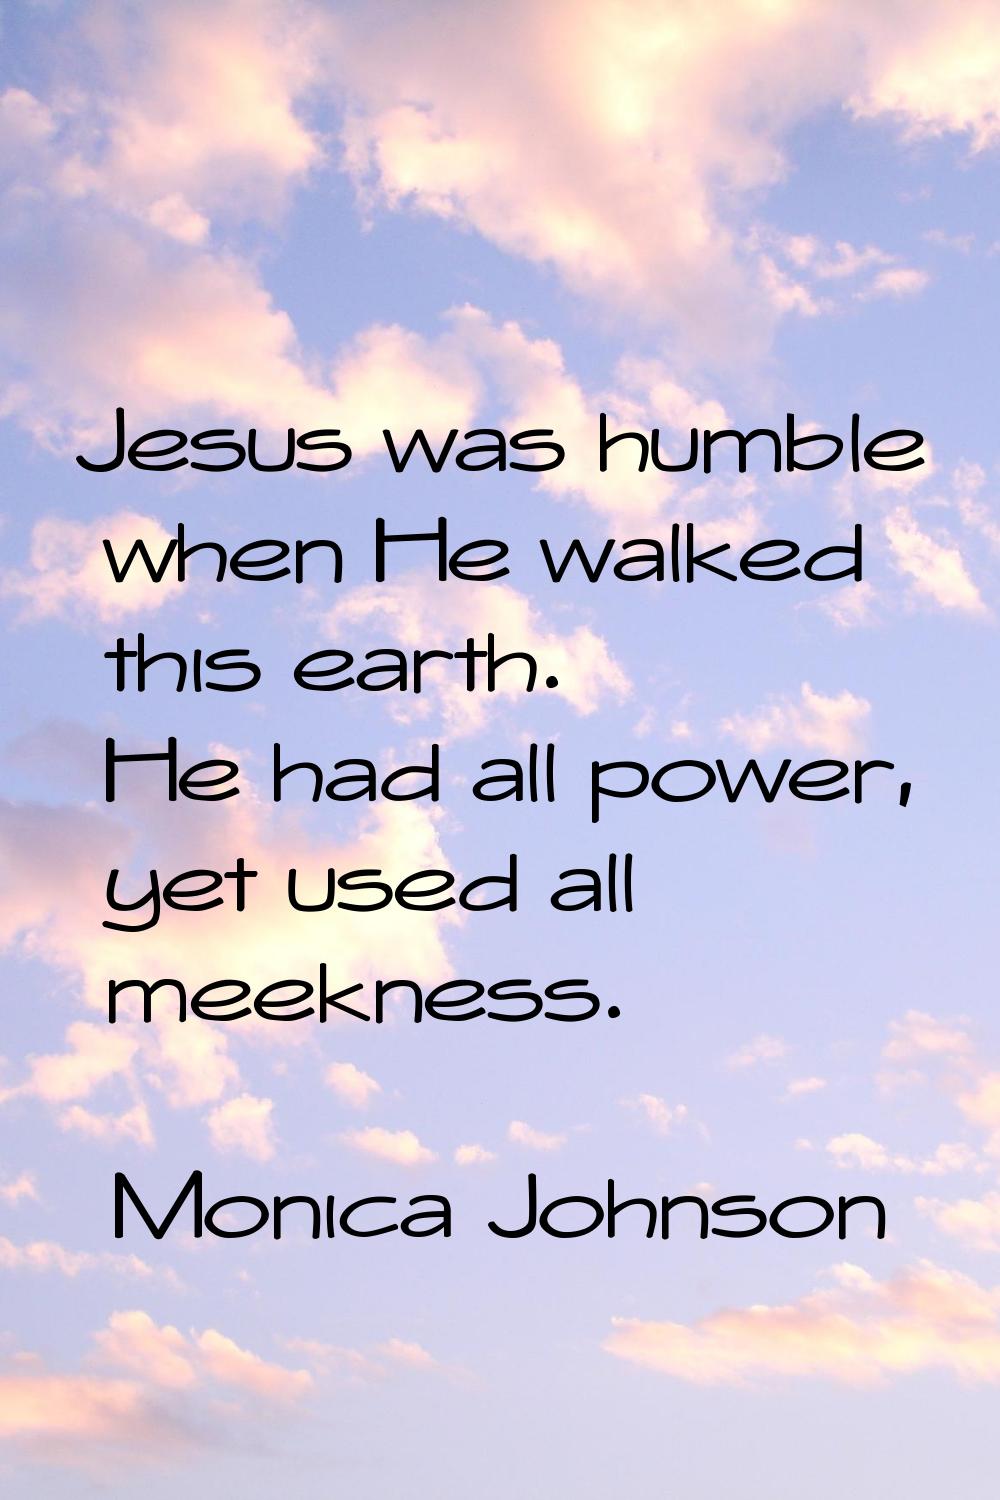 Jesus was humble when He walked this earth. He had all power, yet used all meekness.